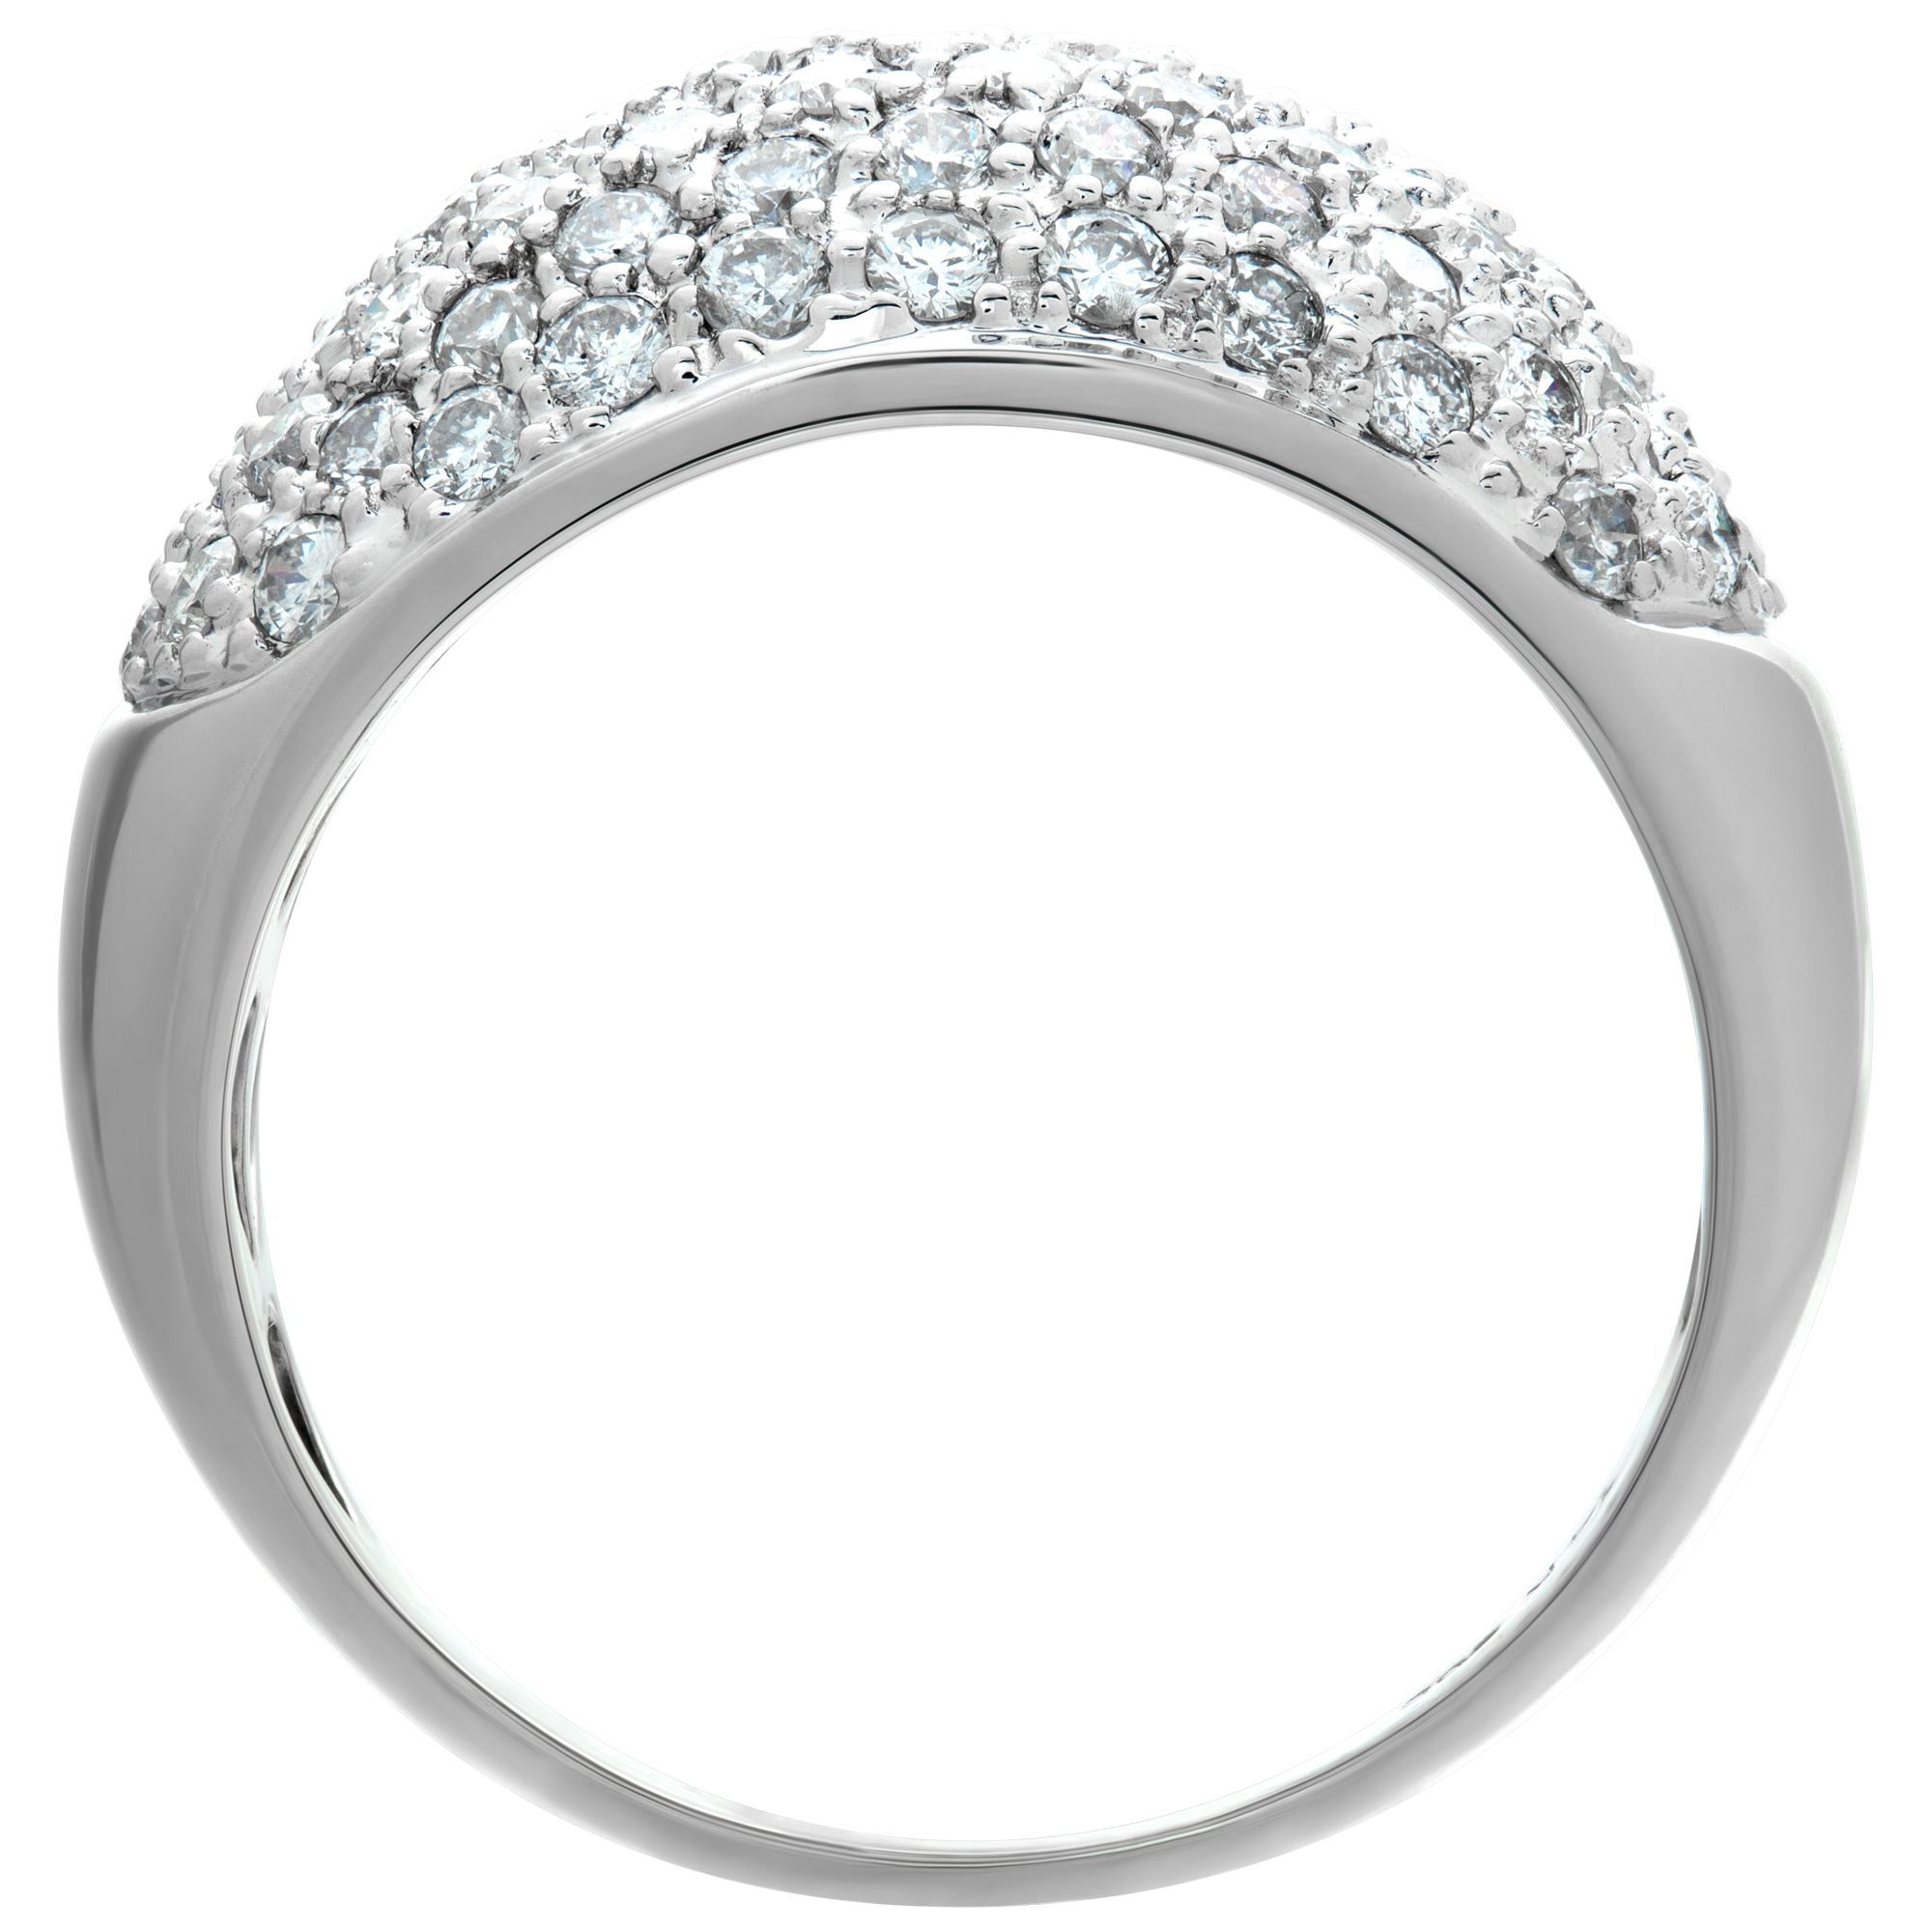 Domed Pave diamond ring in 14k white gold. 3.0 cts in pave diamonds.(G-H, SI2) image 4